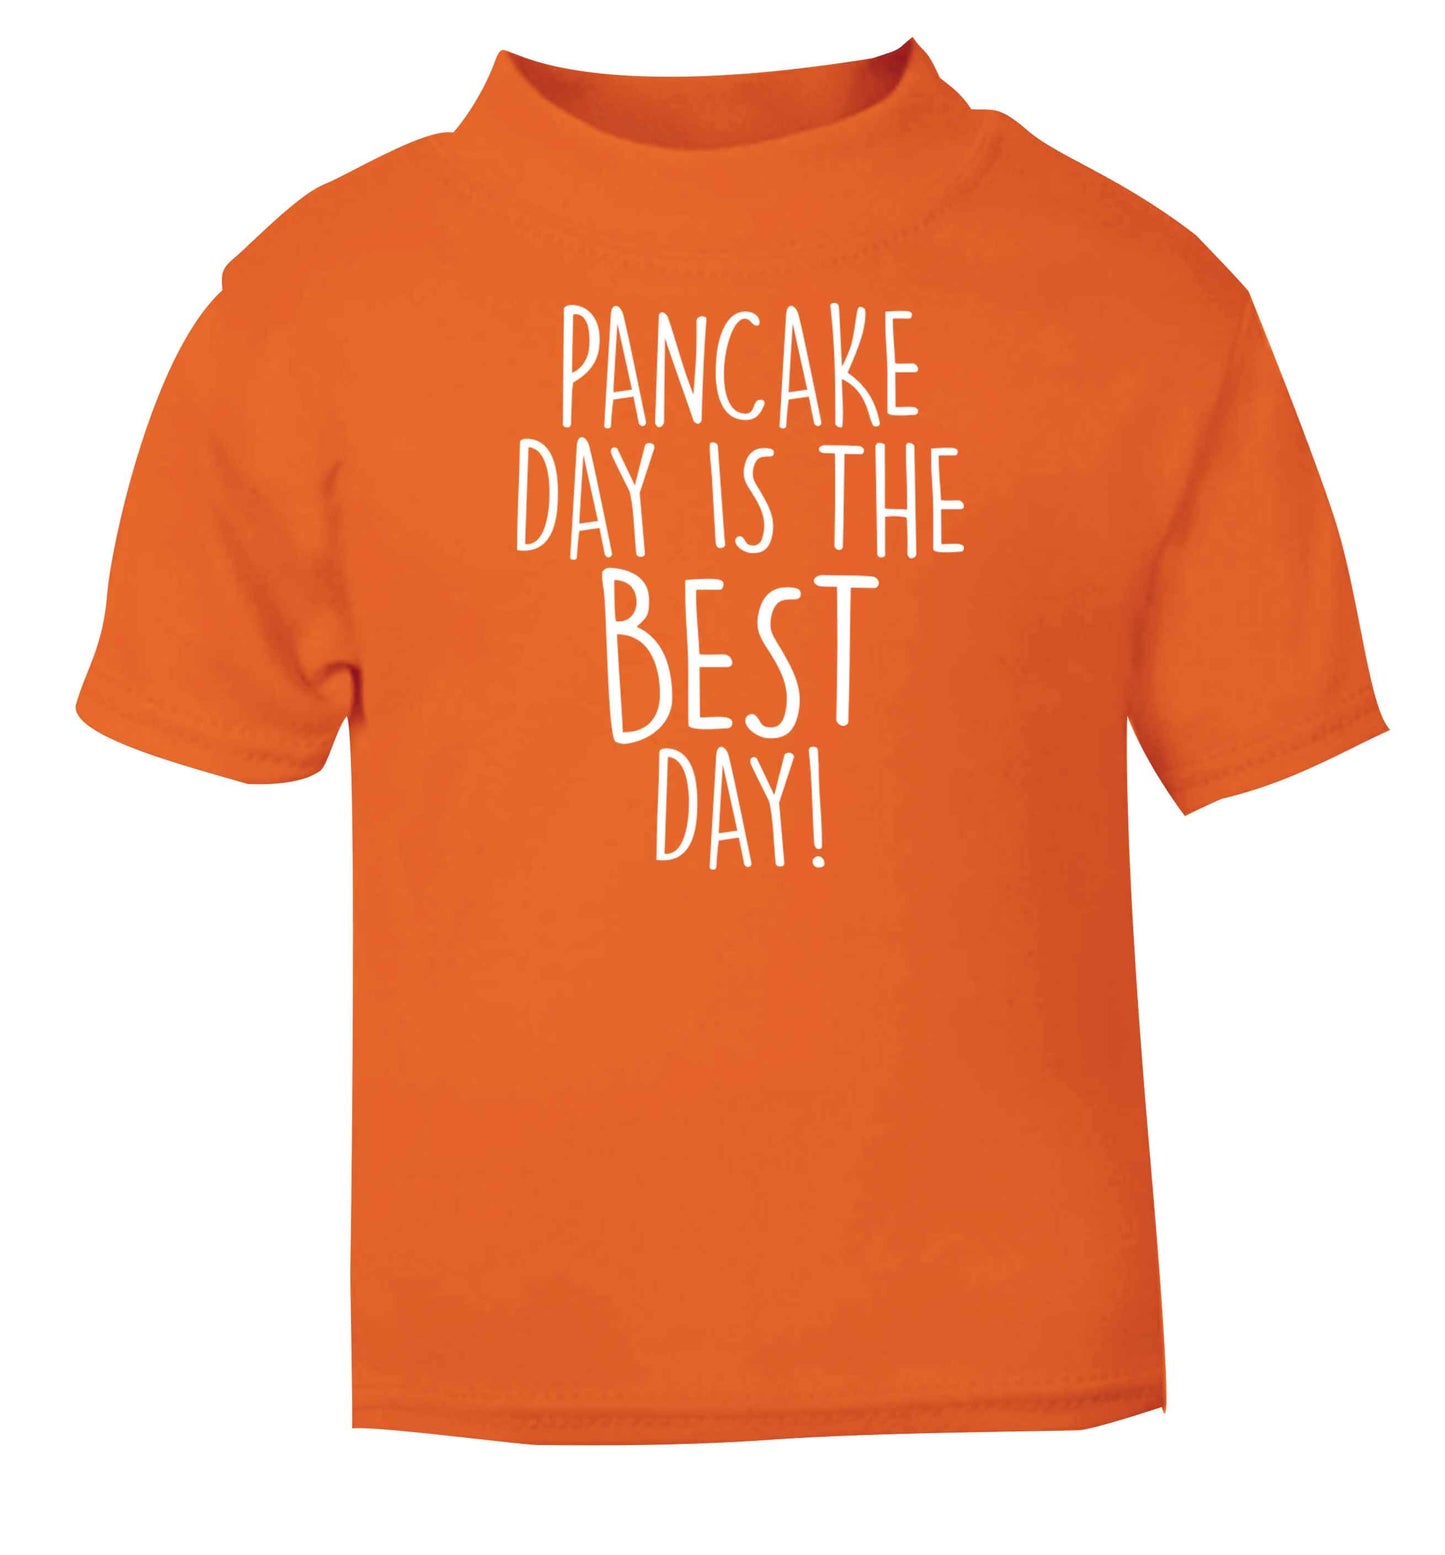 Pancake day is the best day orange baby toddler Tshirt 2 Years